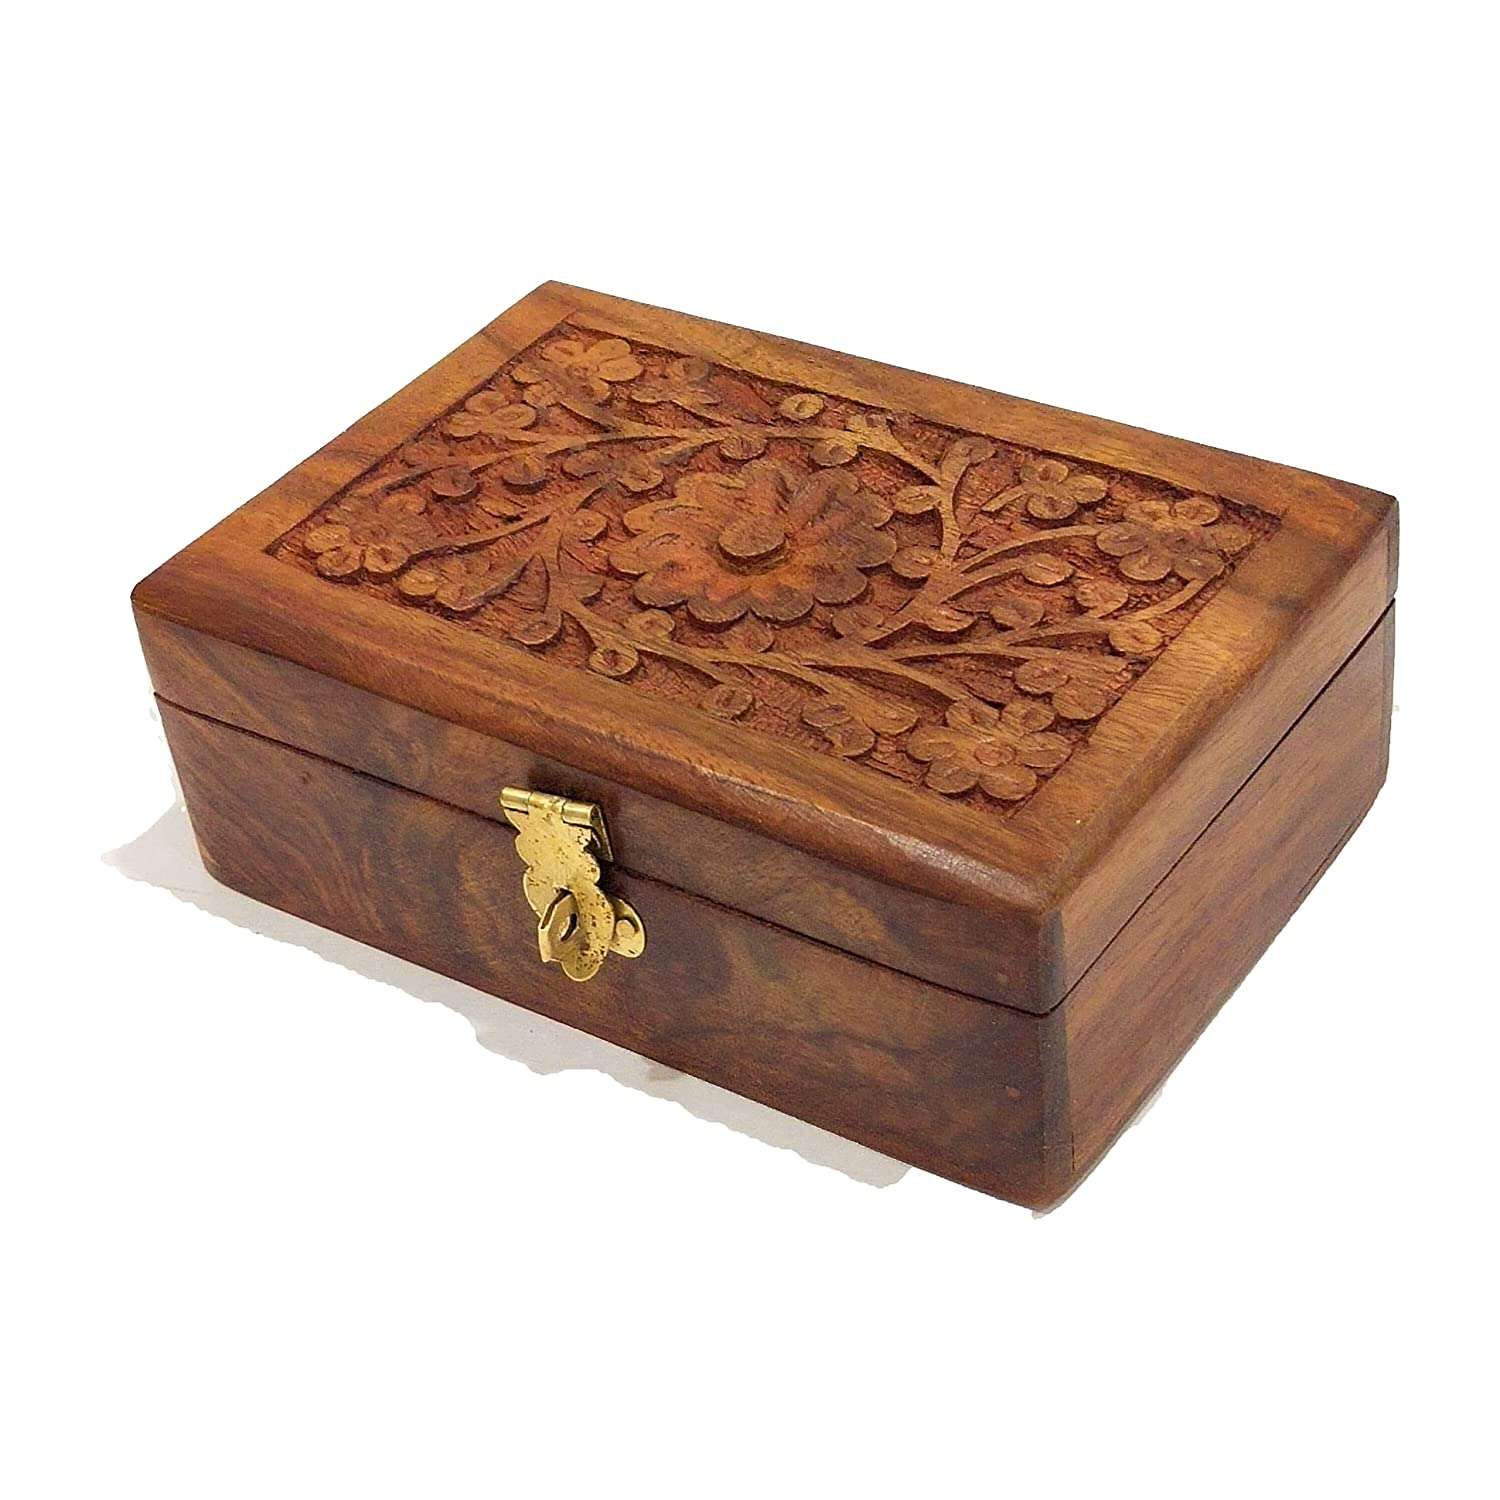 Handmade Wooden Jewellery Box for Women | Wood Jewel Organizer | Hand Carved with Intricate Carvings | Gift Items